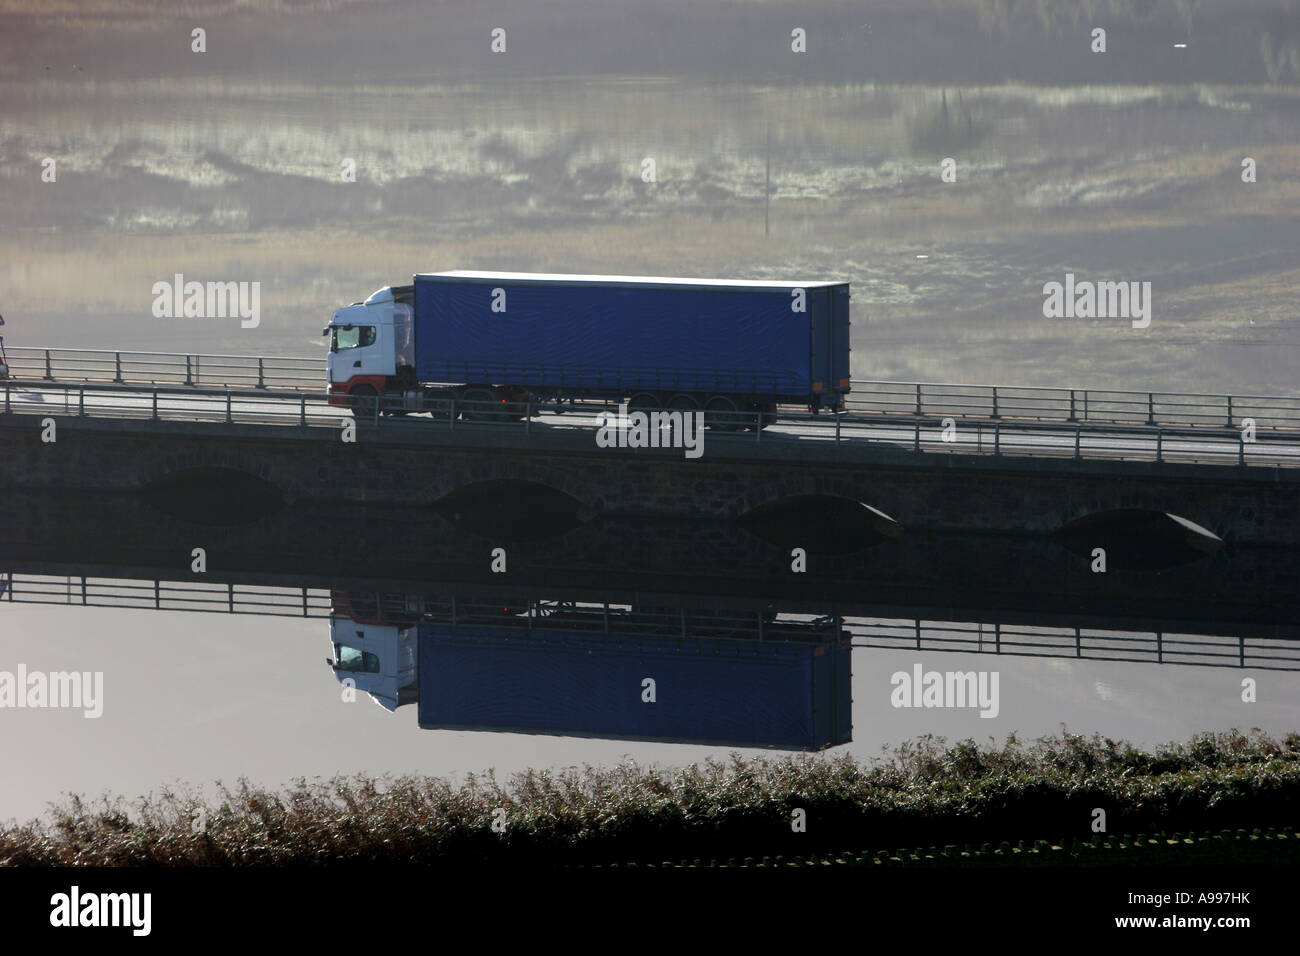 An articulated lorry reflected on a lake in the Pennines, England. Stock Photo